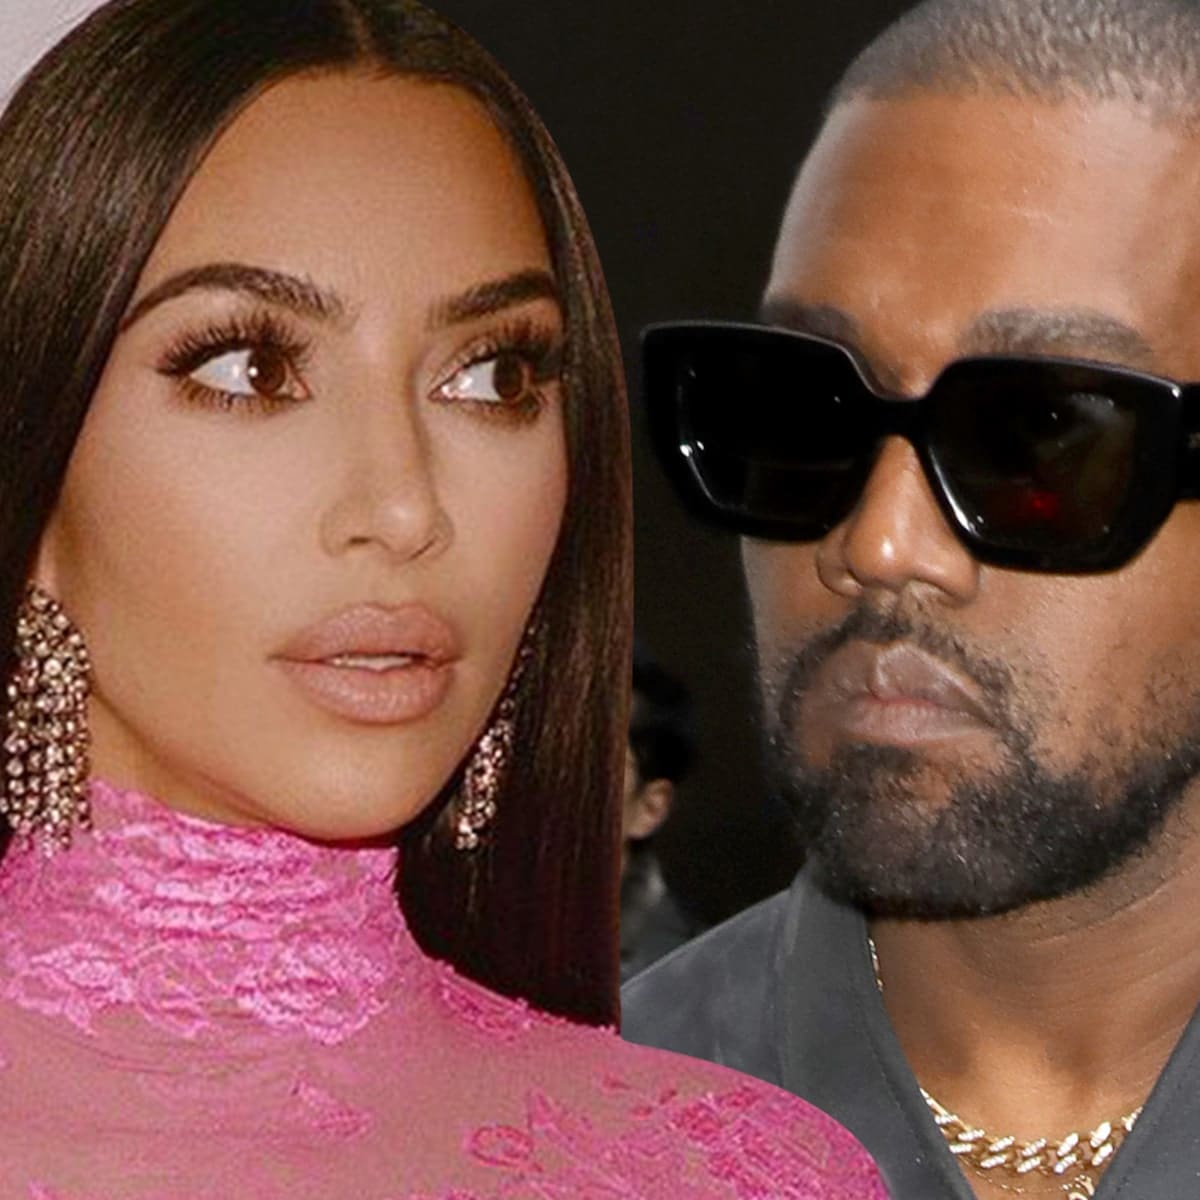 ray-j-addressed-viral-clip-of-kanye-west-and-kim-kardashian-lil-duval-weighs-in-on-the-situation